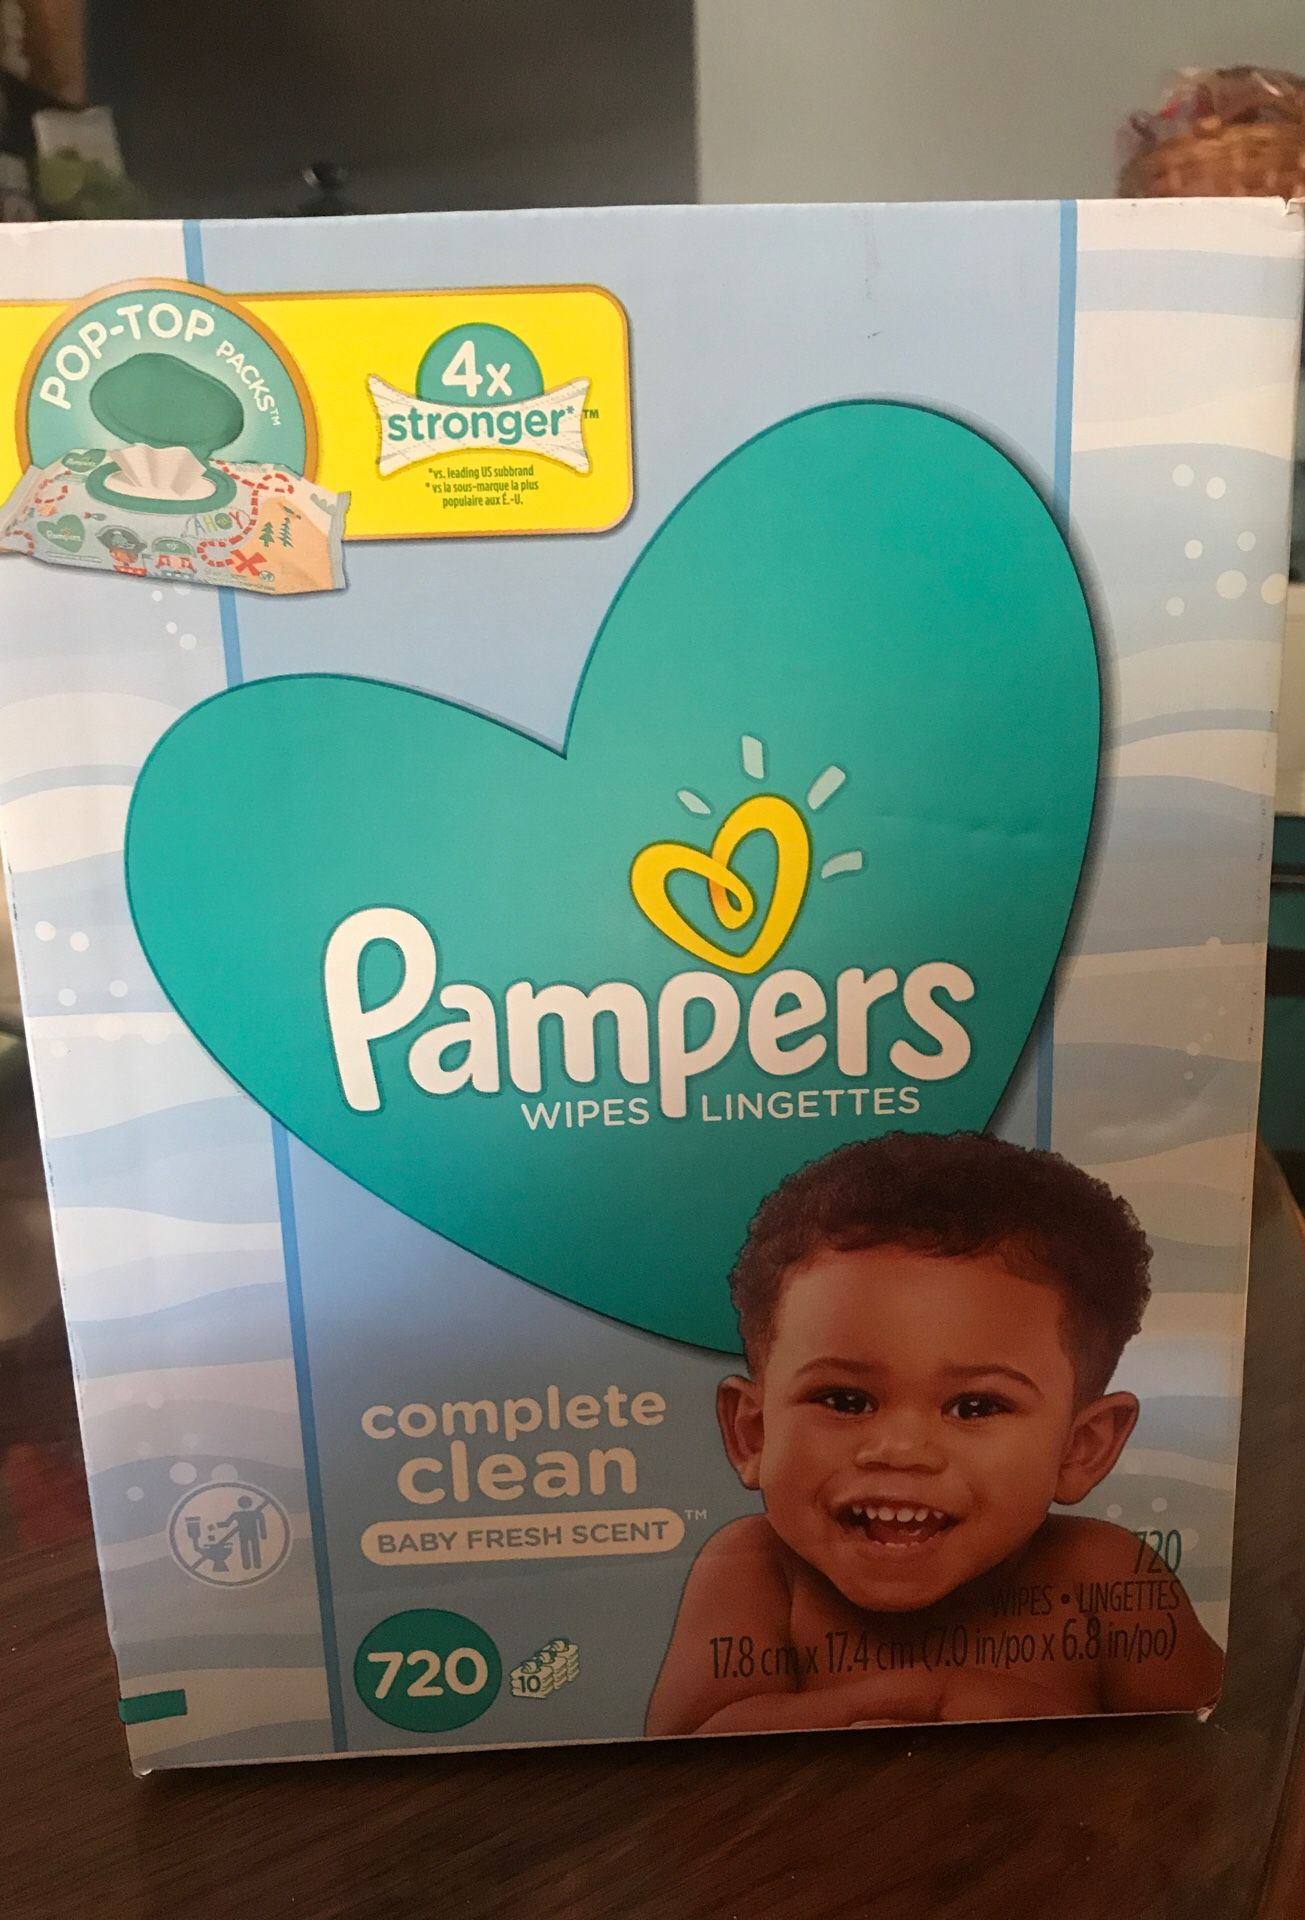 Pampers Wipes Lingettes 720 count